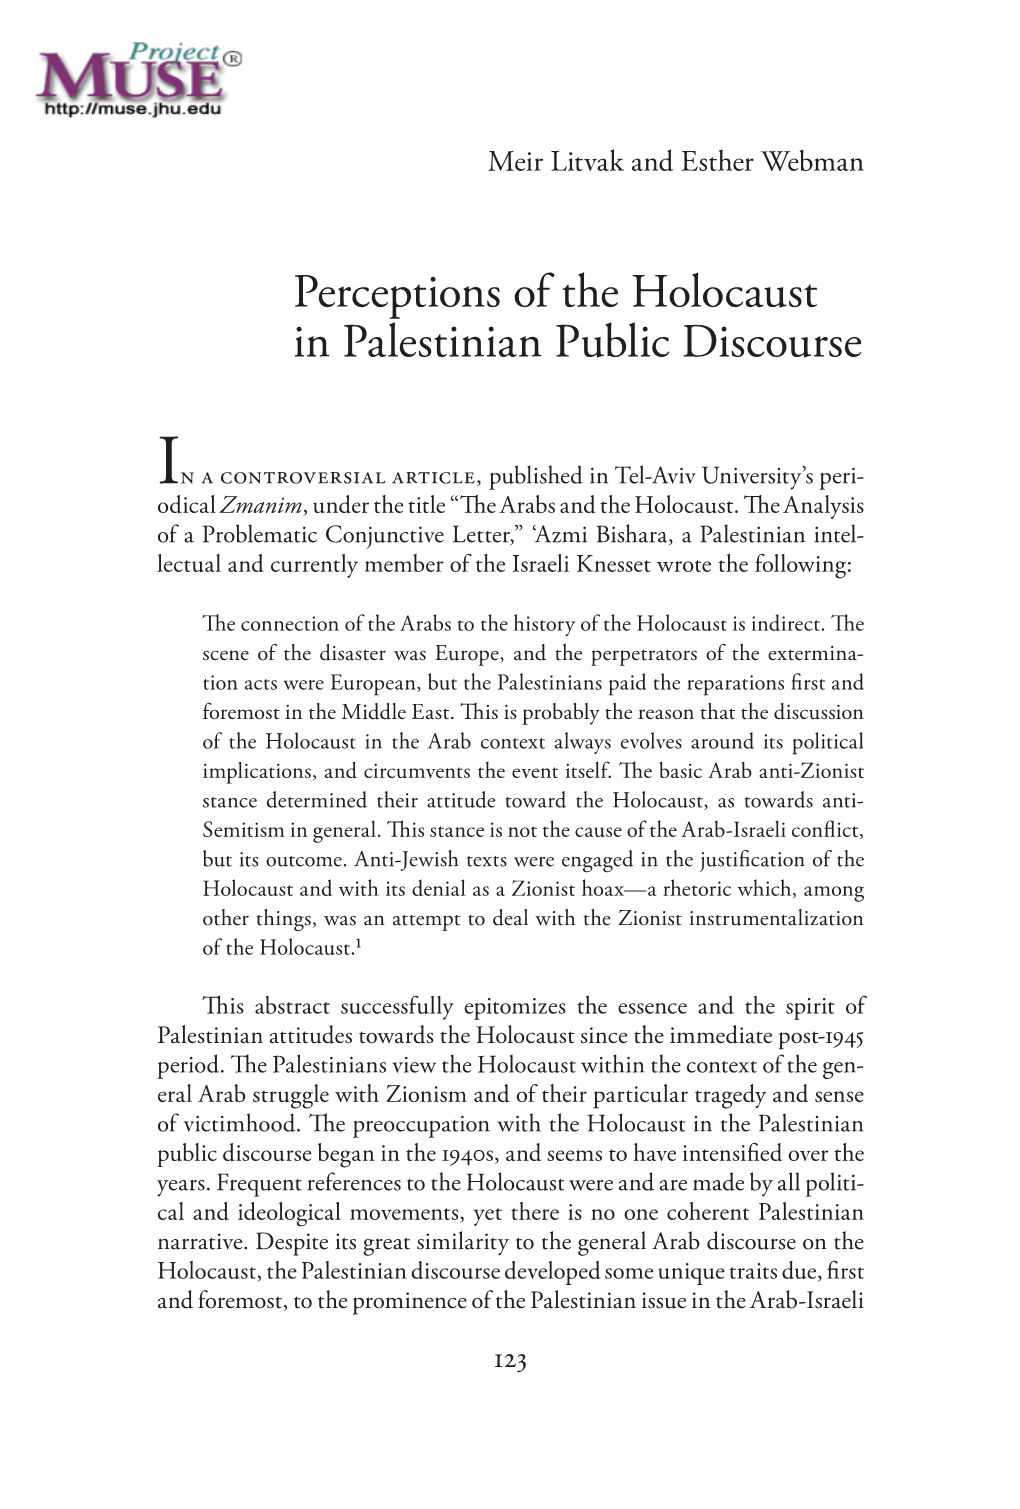 Perceptions of the Holocaust in Palestinian Public Discourse